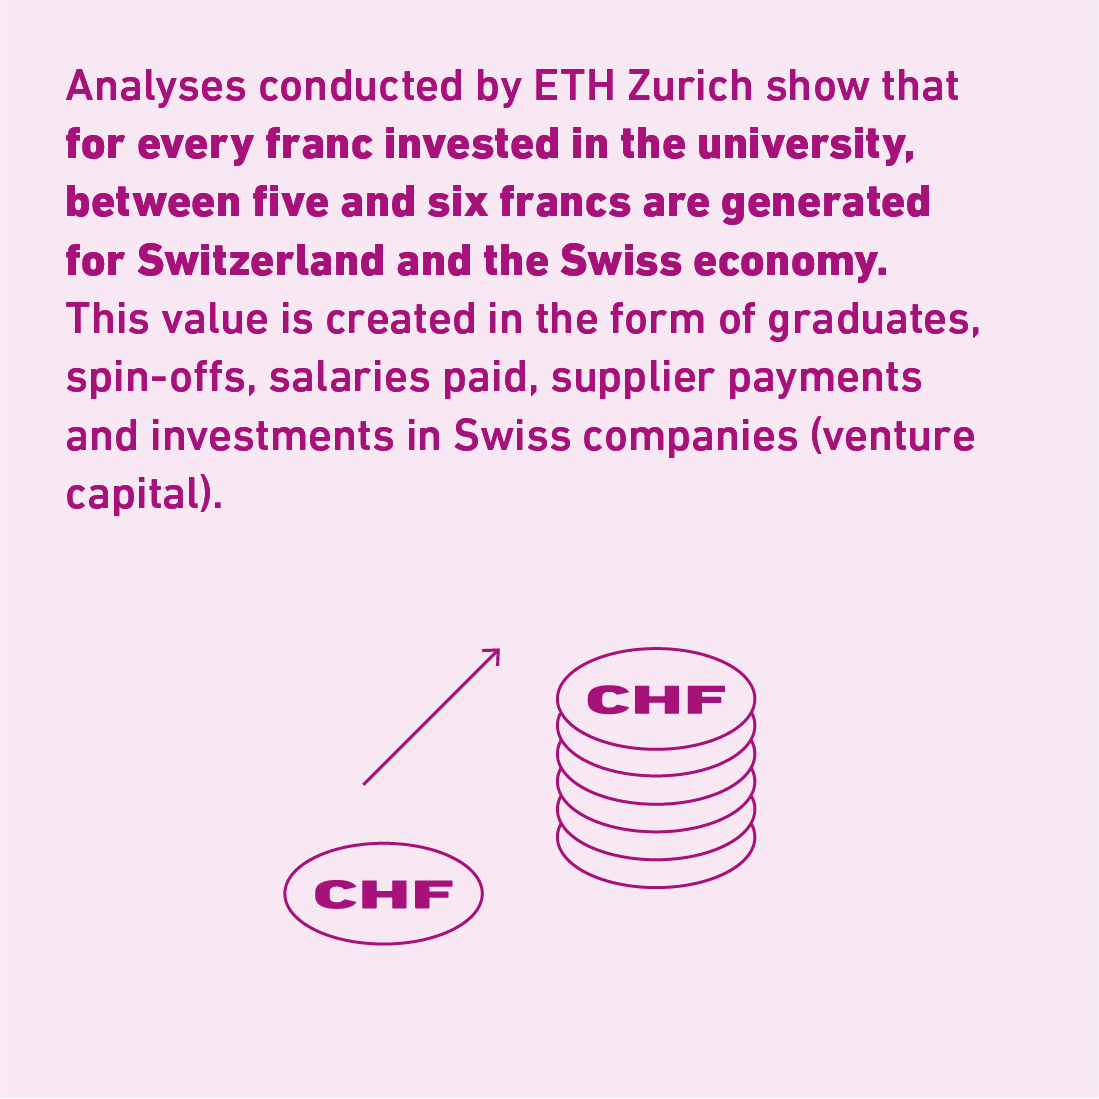 Analyses conducted by ETH Zurich show that for every franc invested in the university, between five and six francs are generated for Switzerland and the Swiss economy. This value is created in the form of graduates, spin-offs, salaries paid, supplier payments and investments in Swiss companies (venture capital). The Link goes to the Value Creation Model.